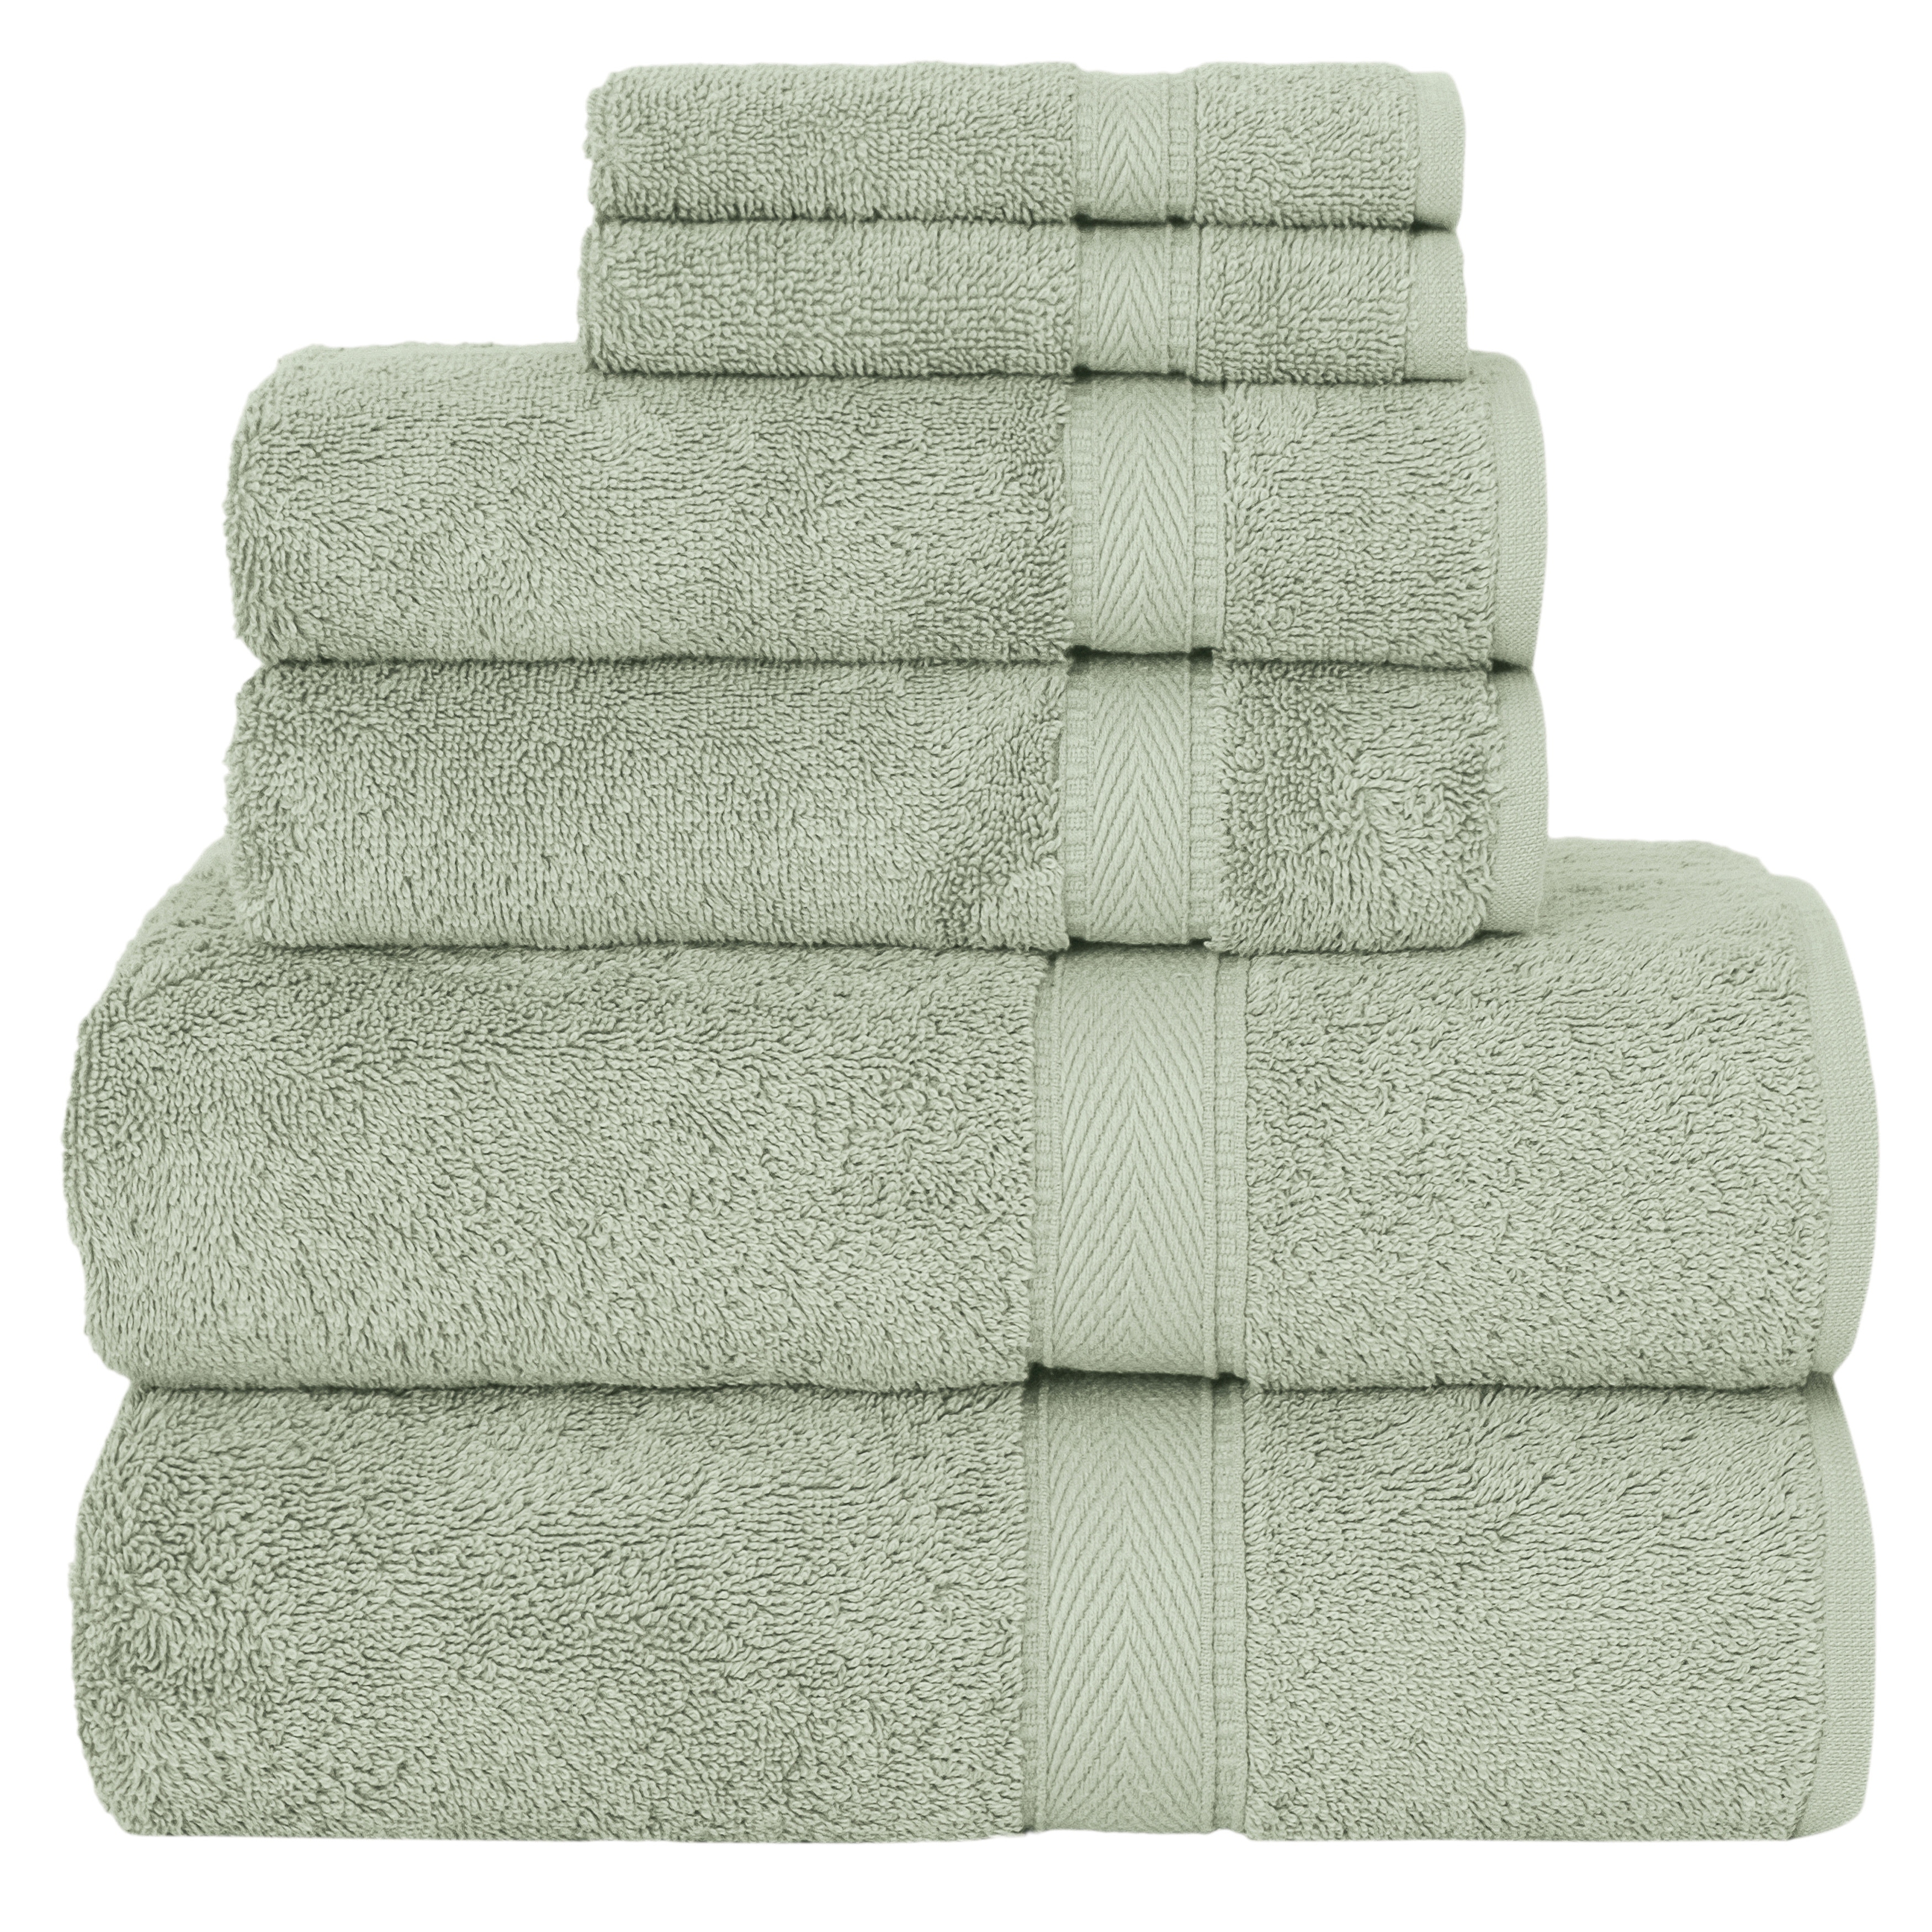 Standard Issue Organic Towels – Ace Hotel Shop